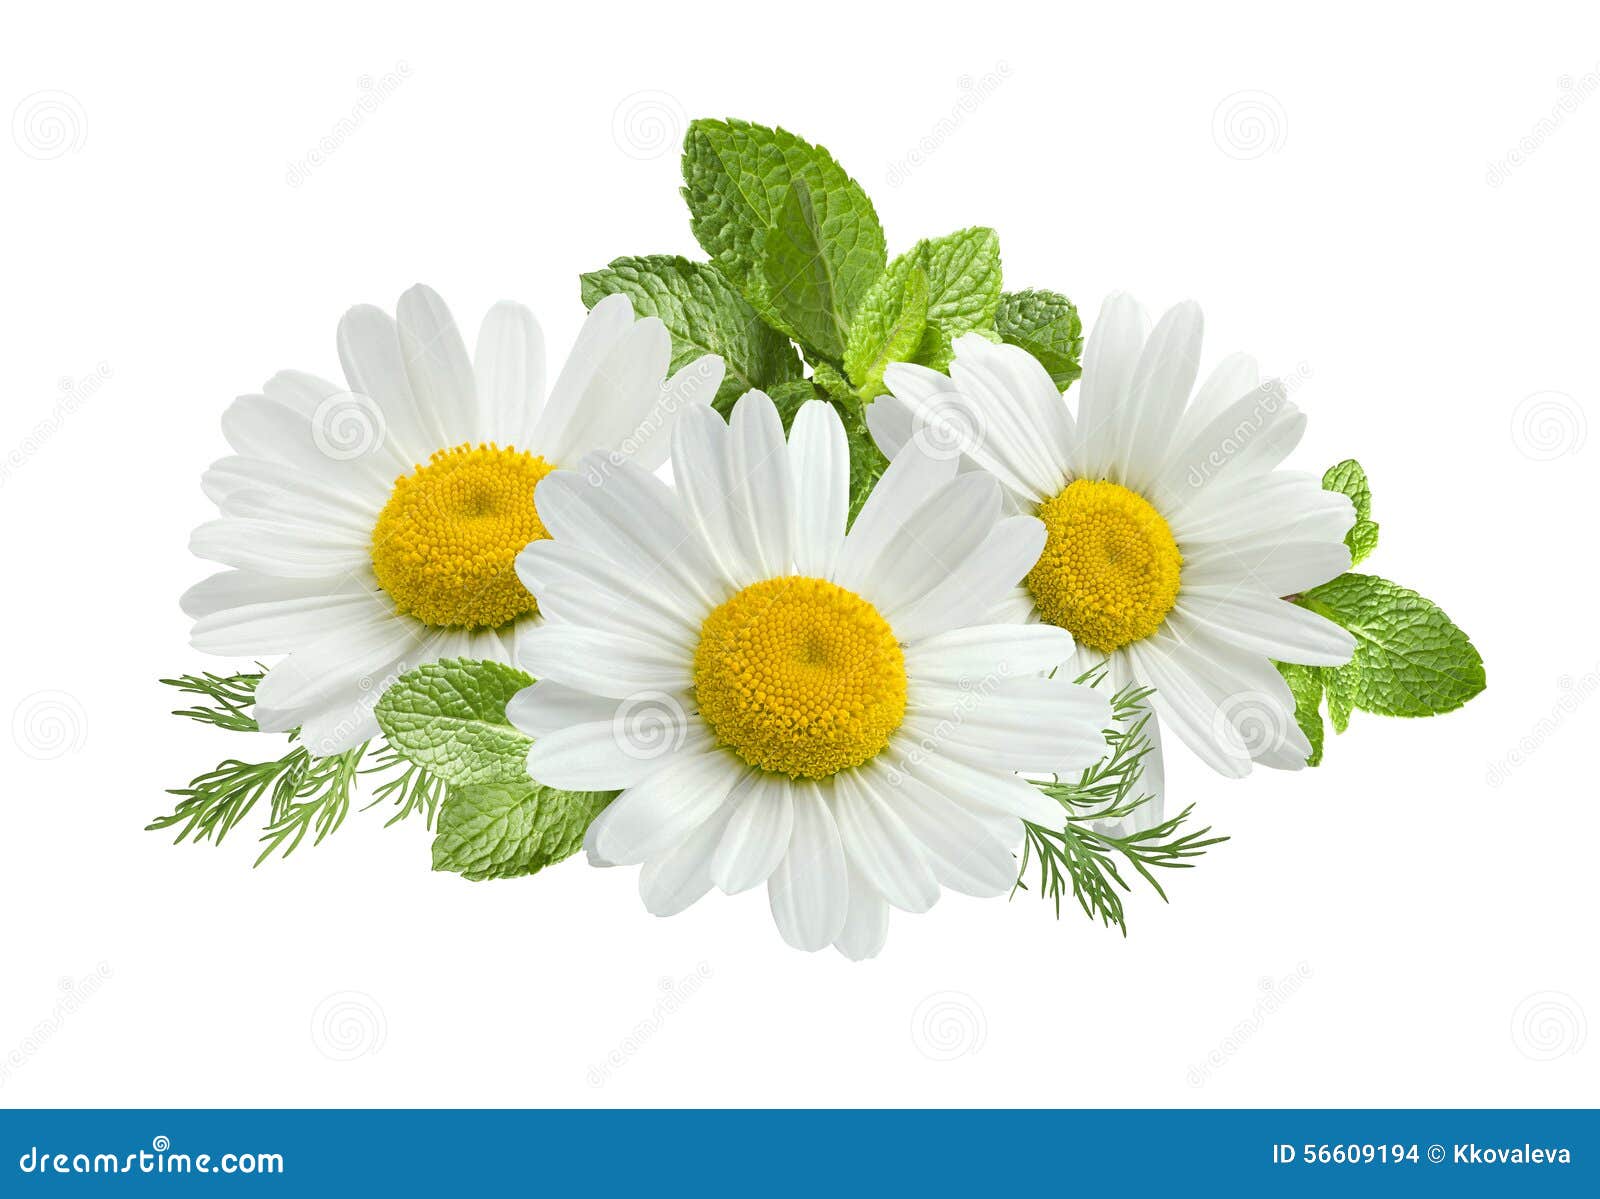 chamomile flower mint leaves composition  on white